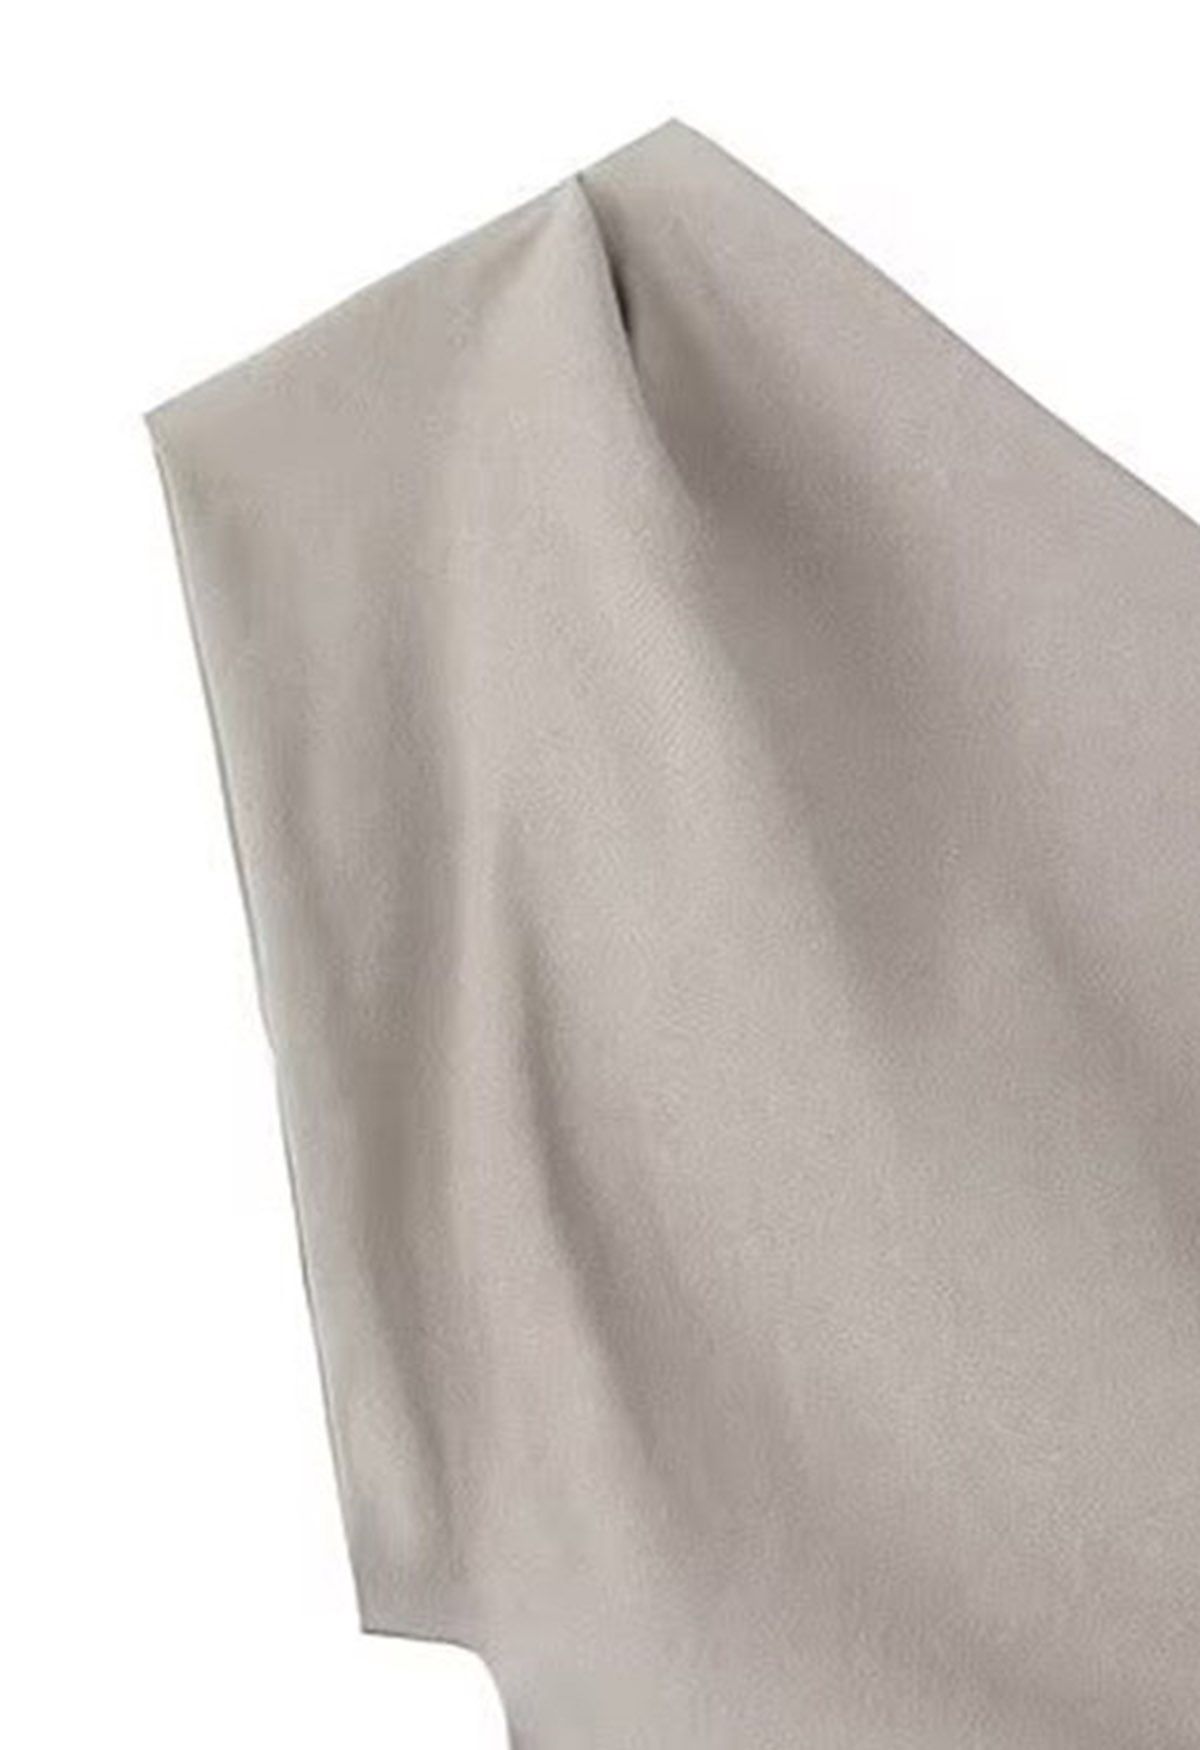 One-Shoulder Asymmetric Hem Top in Taupe